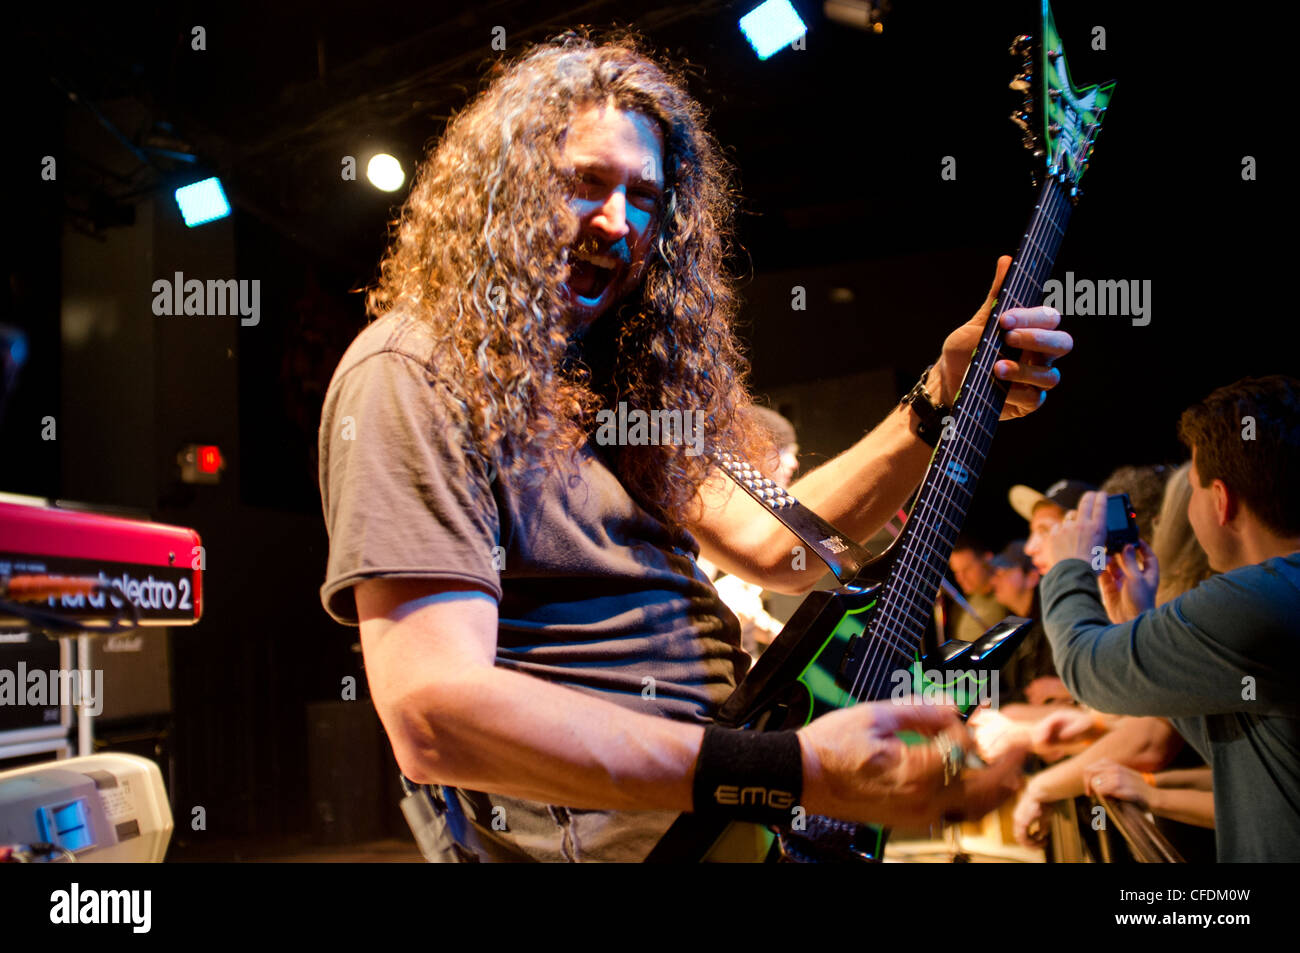 Wayne Findlay rockin' with the Michael Schenker Group on stage at The Empire Club in Springfield, Virginia. Stock Photo